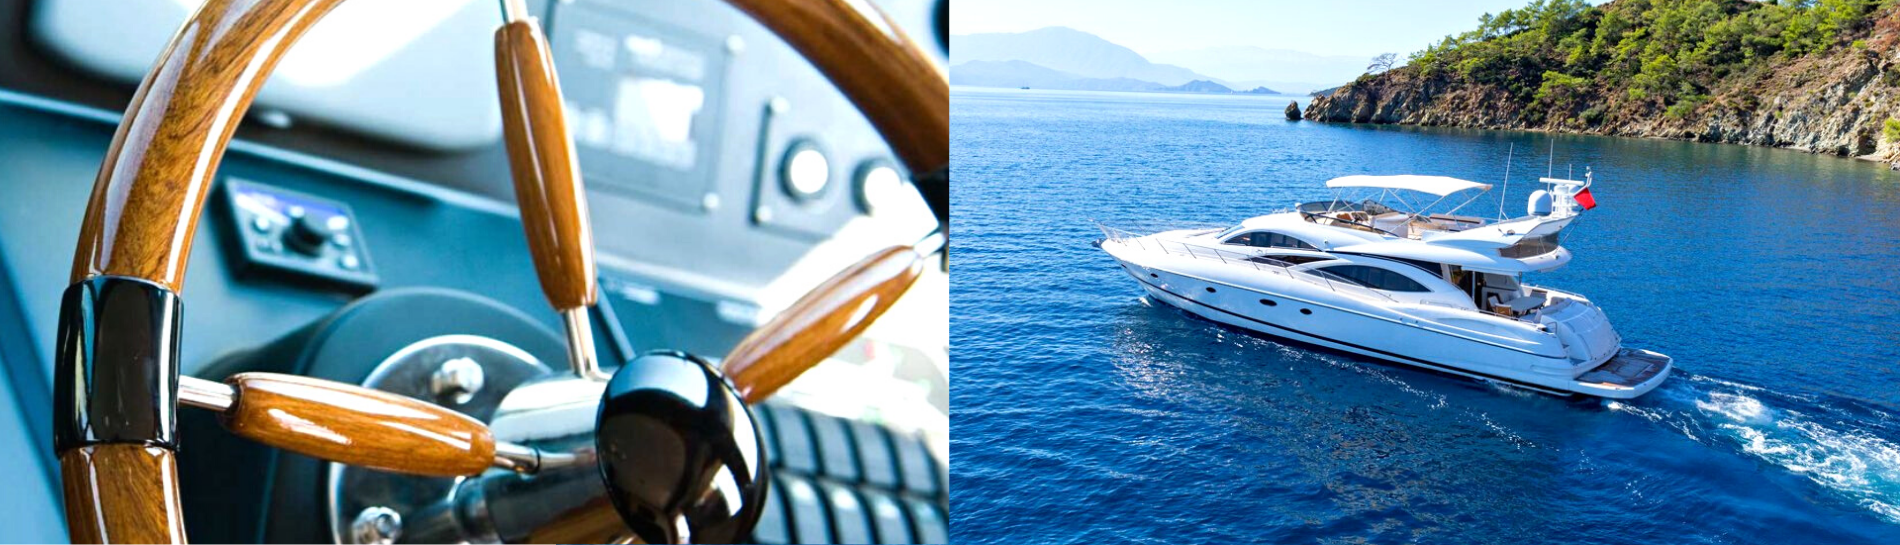 Yacht Care Systems